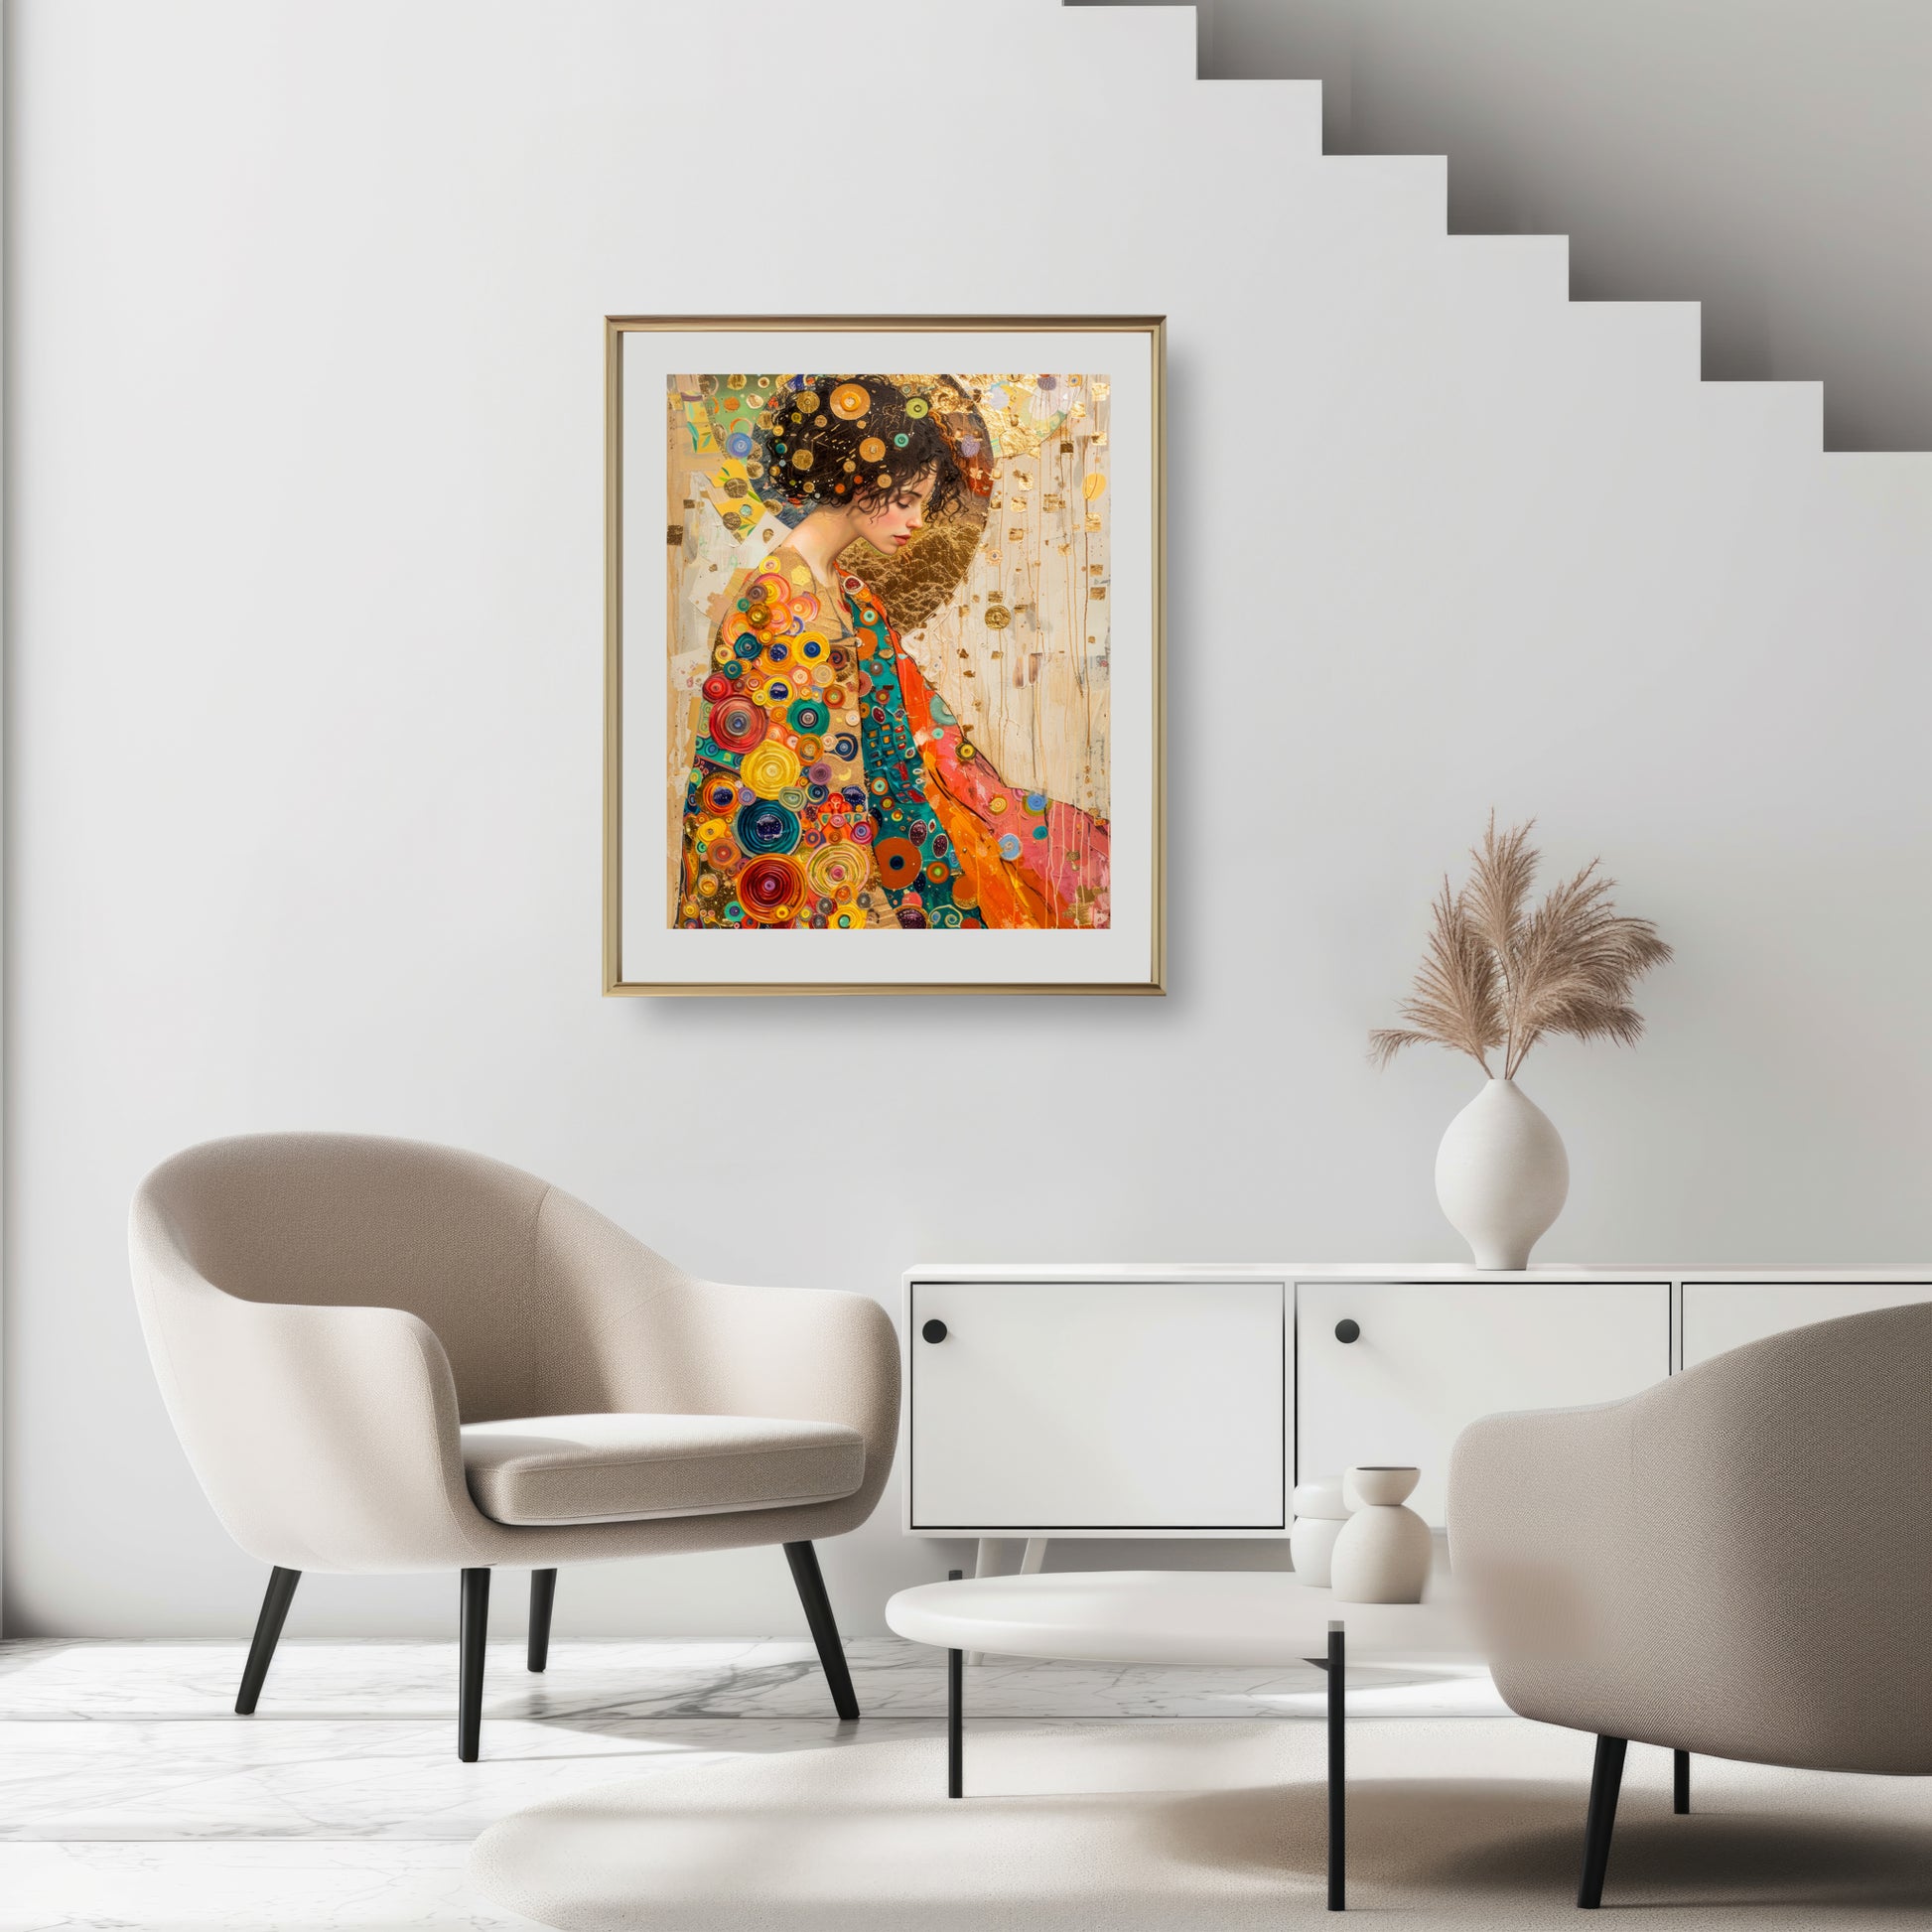 A framed fine art print depicting a woman in profile with a vibrant shawl against a detailed golden background from the Heart Of Gold collection.